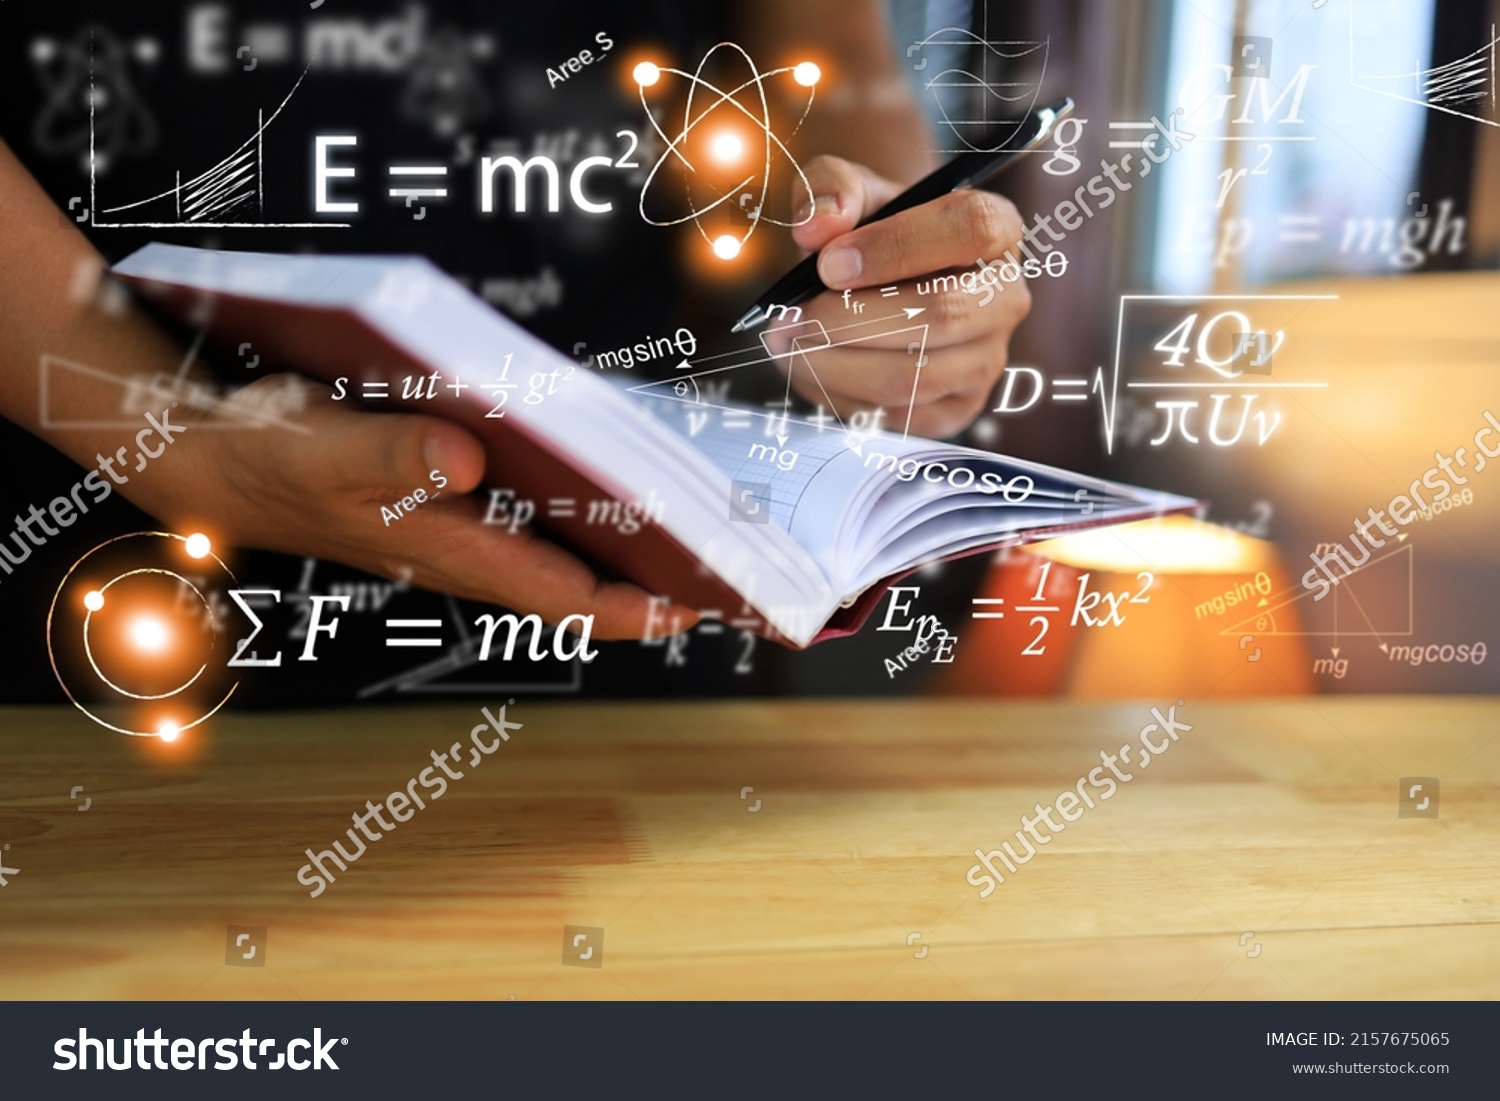 Physics equations floating in the background, hands writing in notebooks on wooden tables, representing the learning teaching or scientific notes of Albert Einstein and Sir Isaac Newton or physics all #2157675065